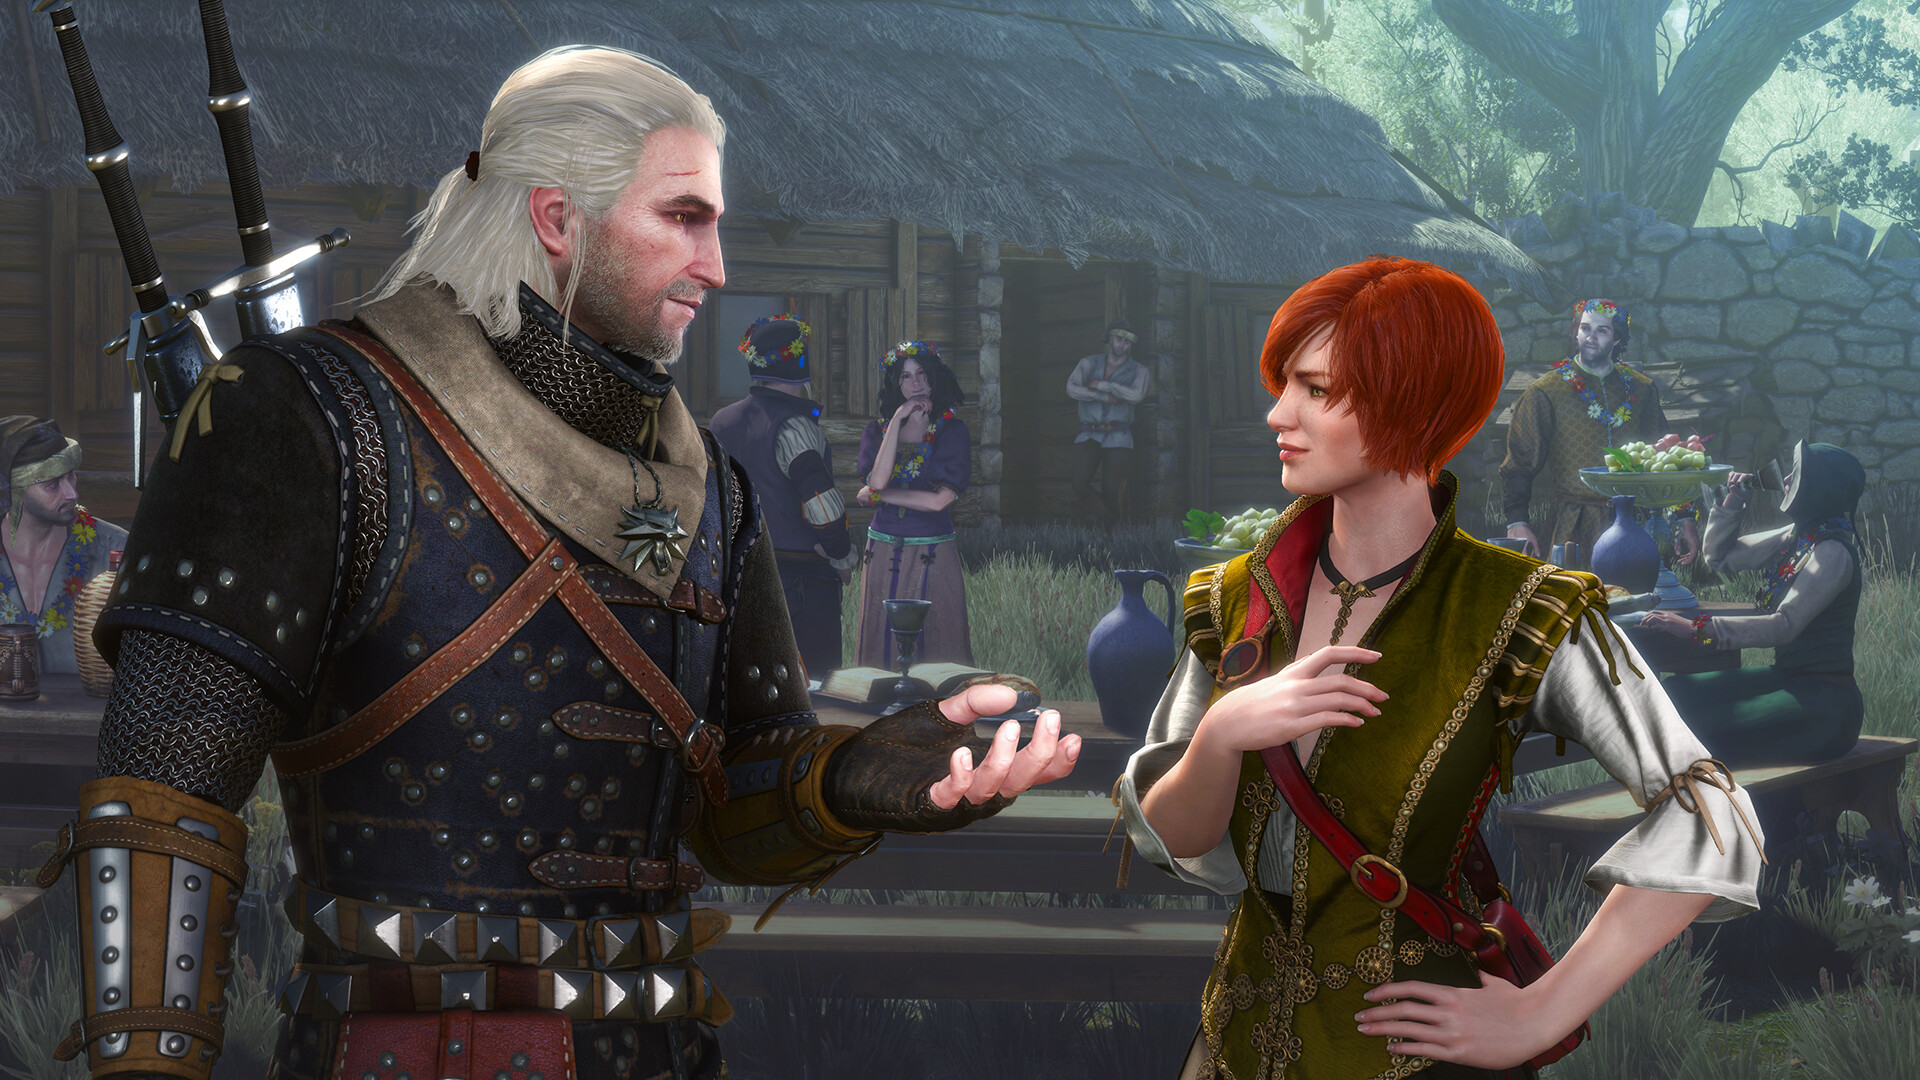 The Witcher 3: Wild Hunt - Hearts of Stone on Steam